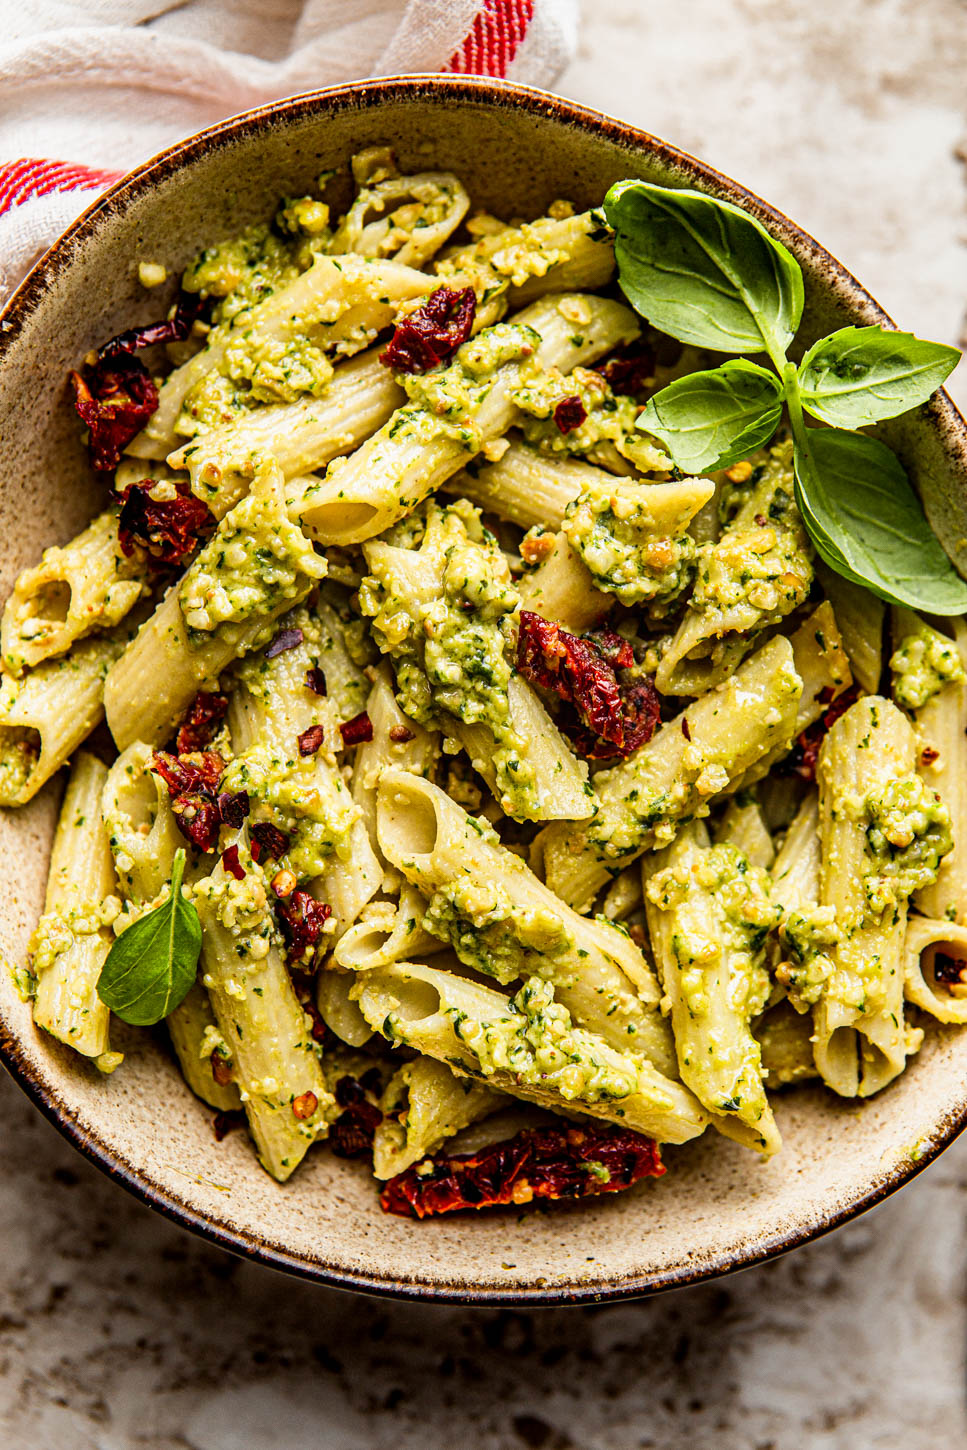 pesto pasta photography with sundried tomatoes an basil